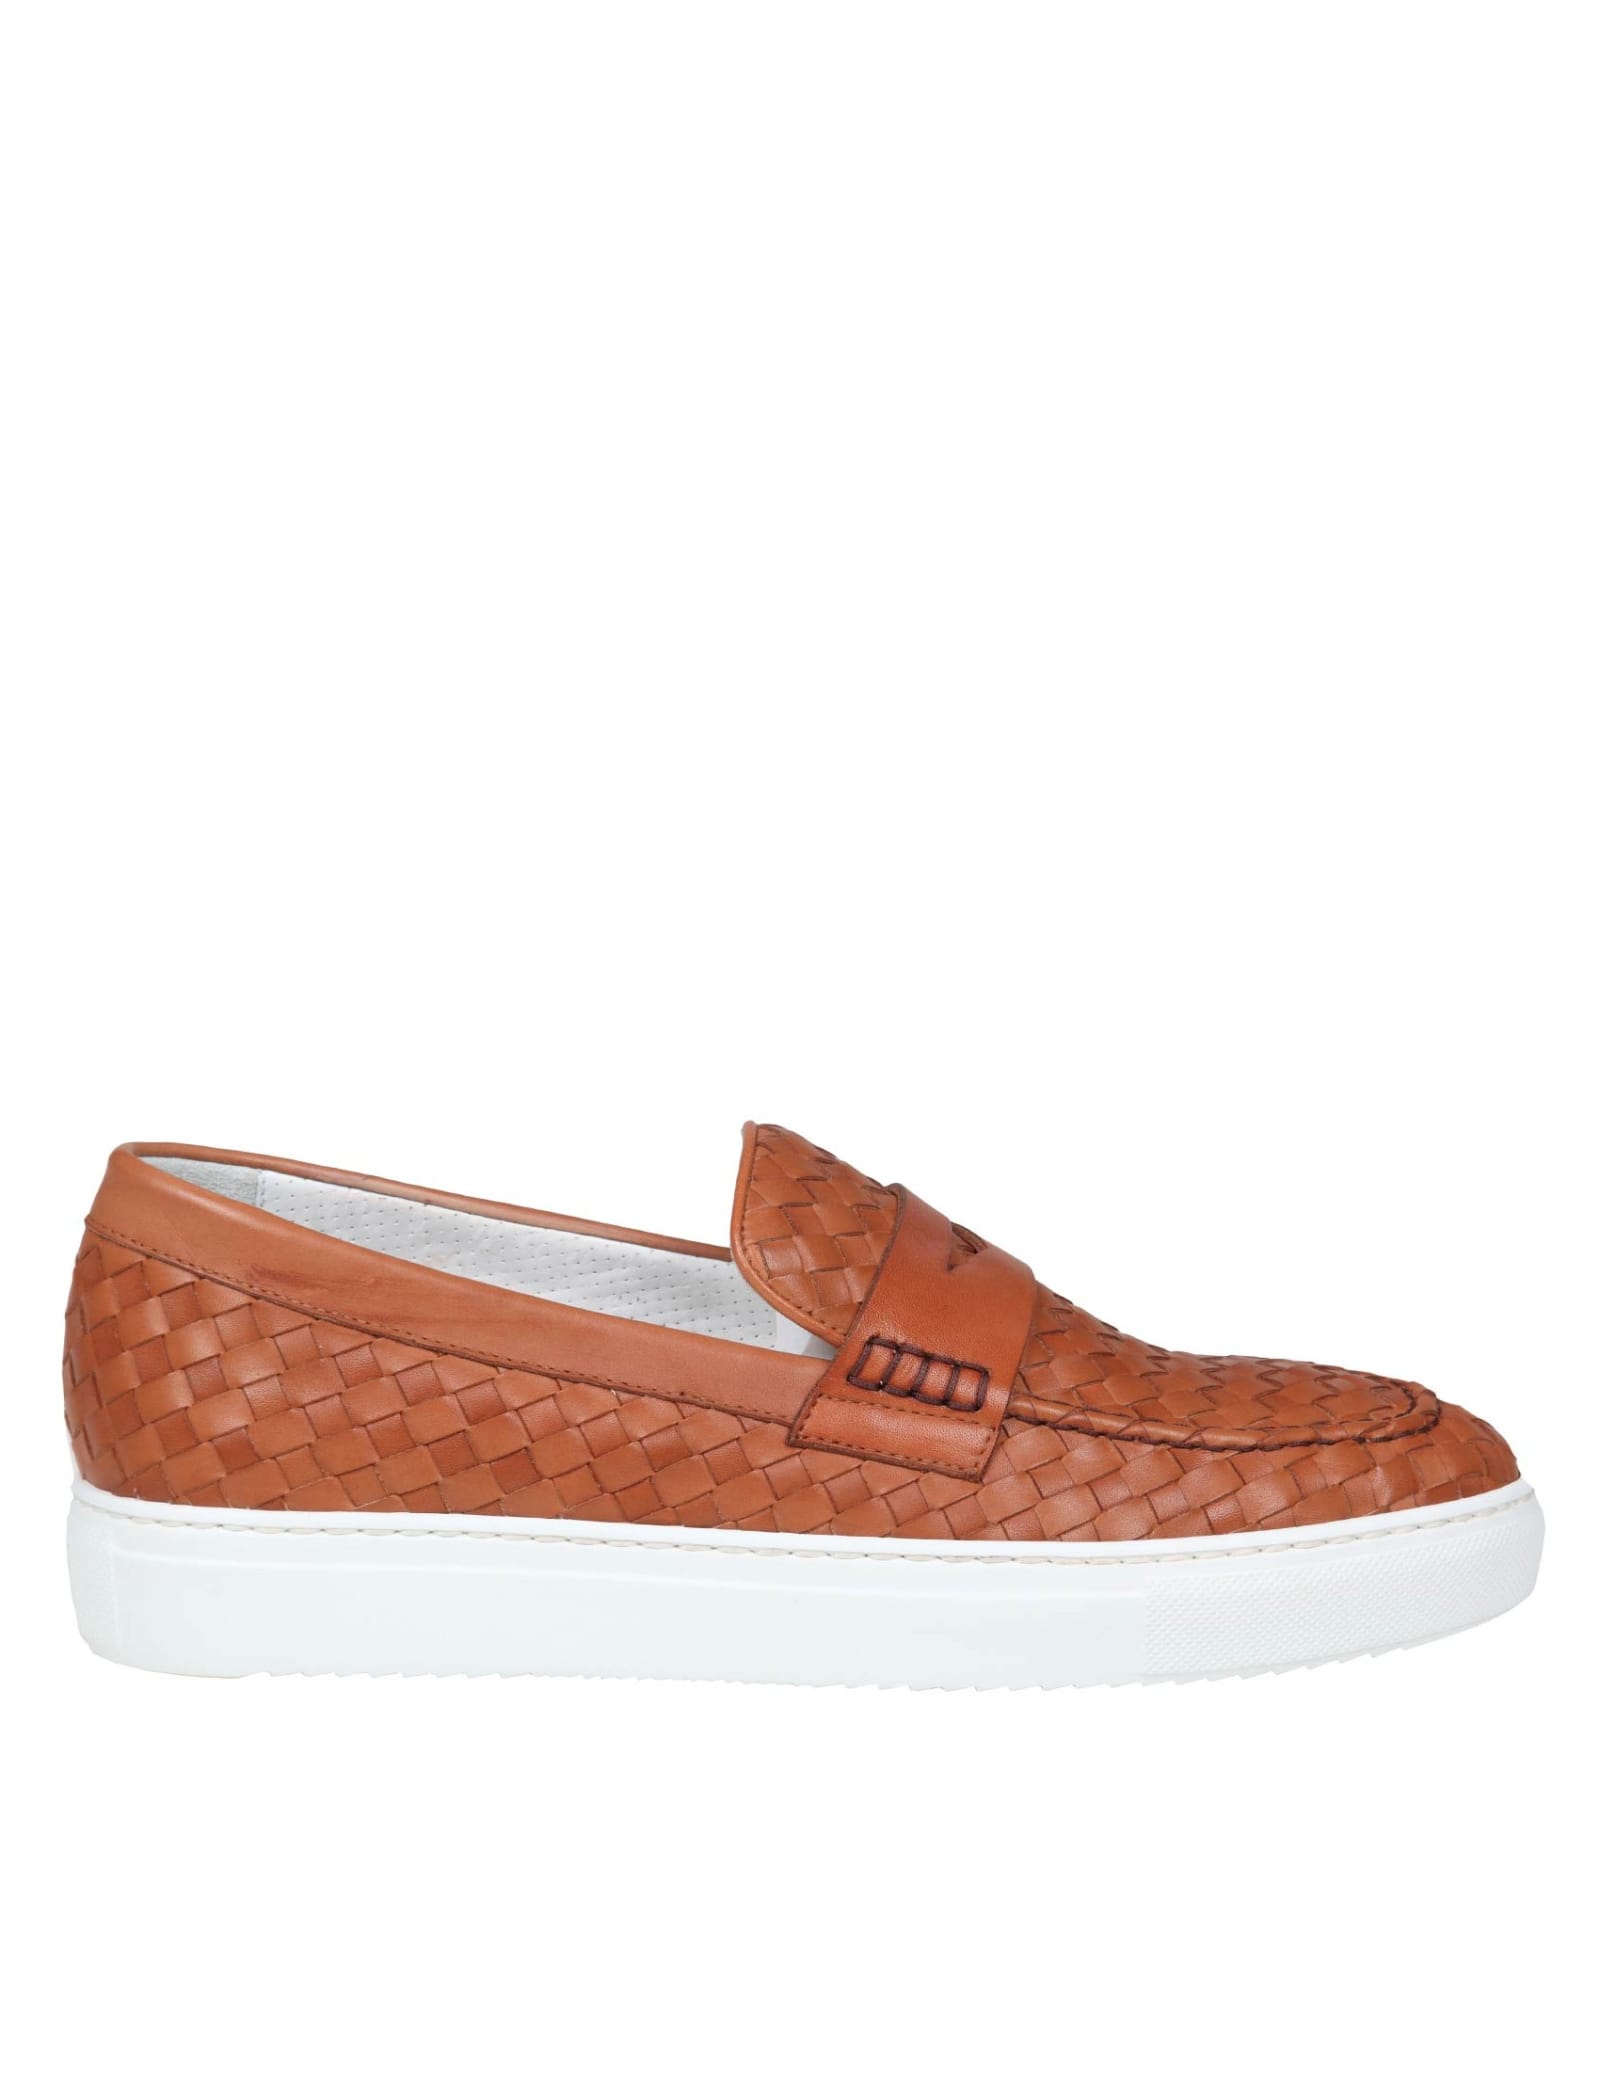 DOUCAL'S PENNY LOAFER IN WOVEN LEATHER